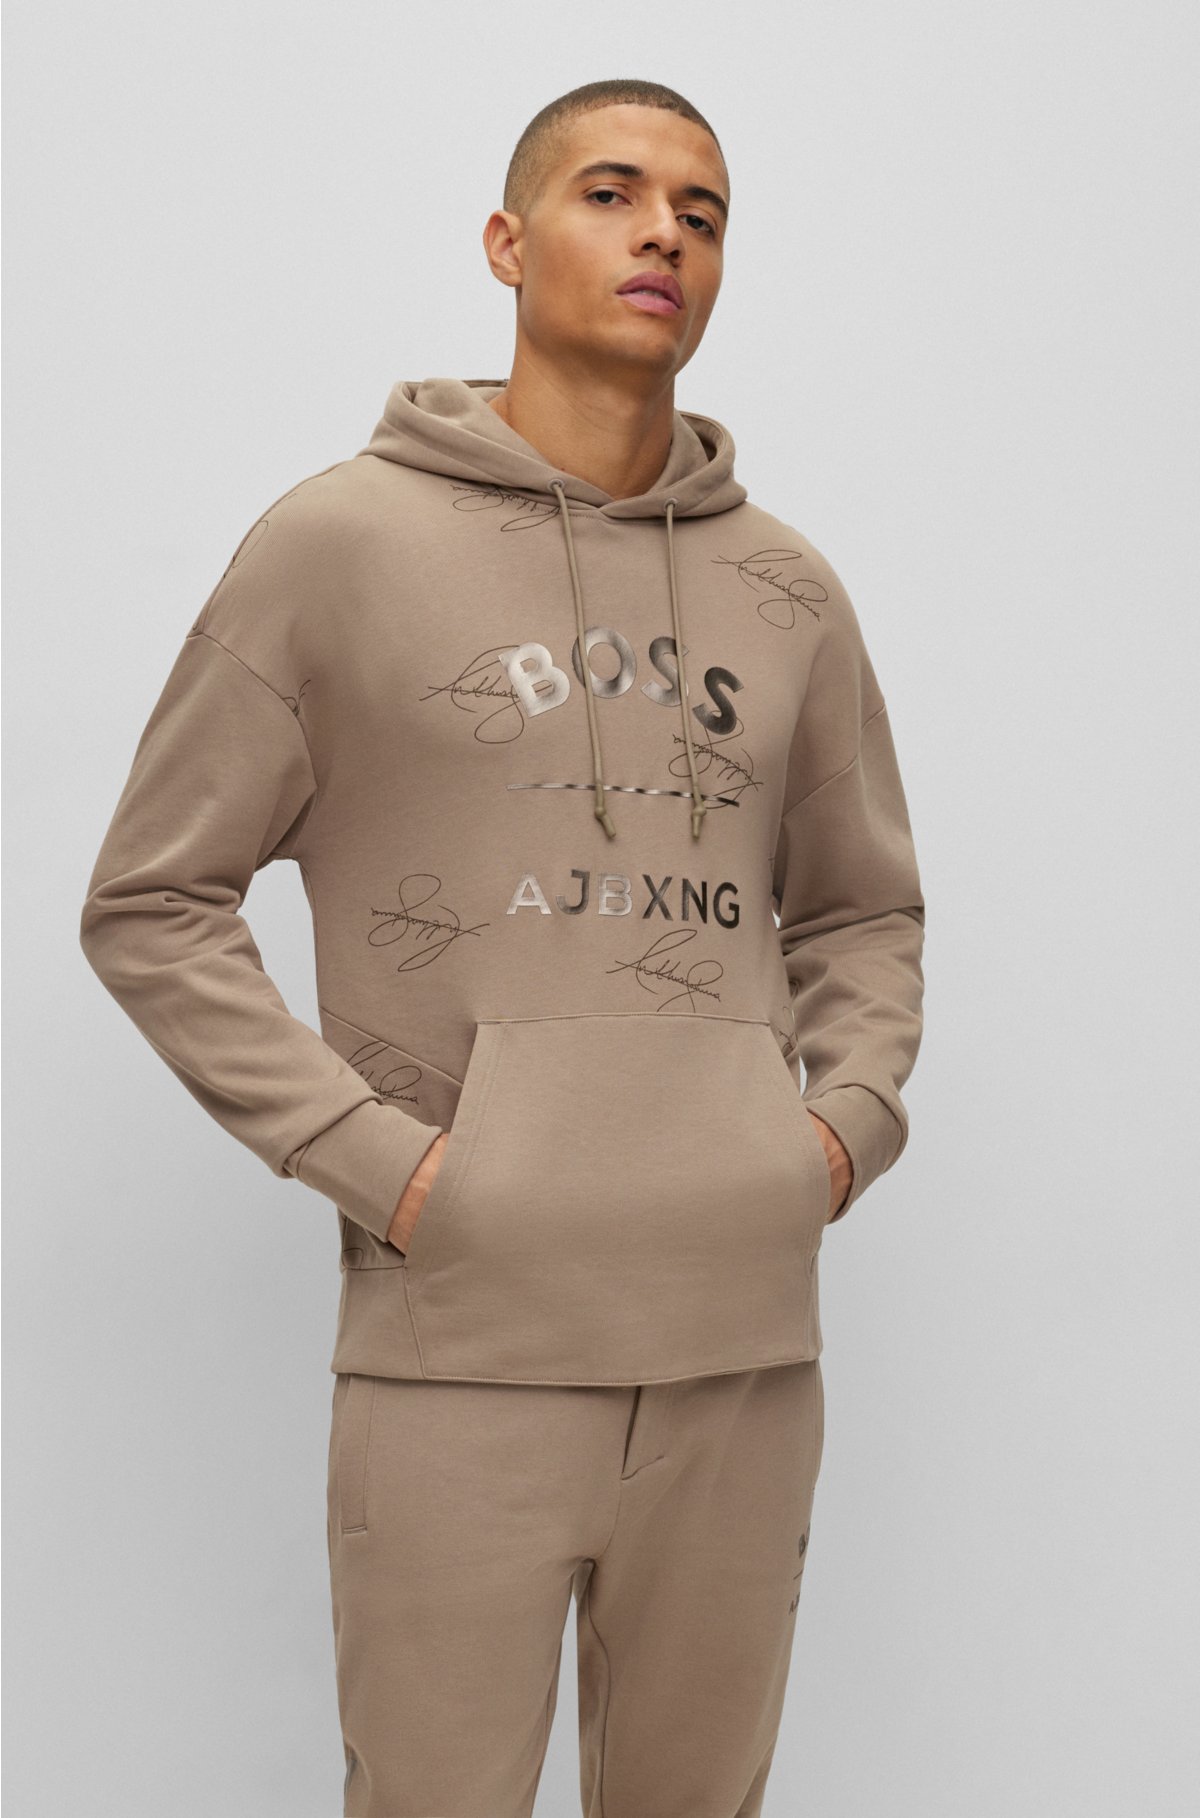 BOSS - BOSS x cotton branding with hoodie relaxed-fit collaborative AJBXNG